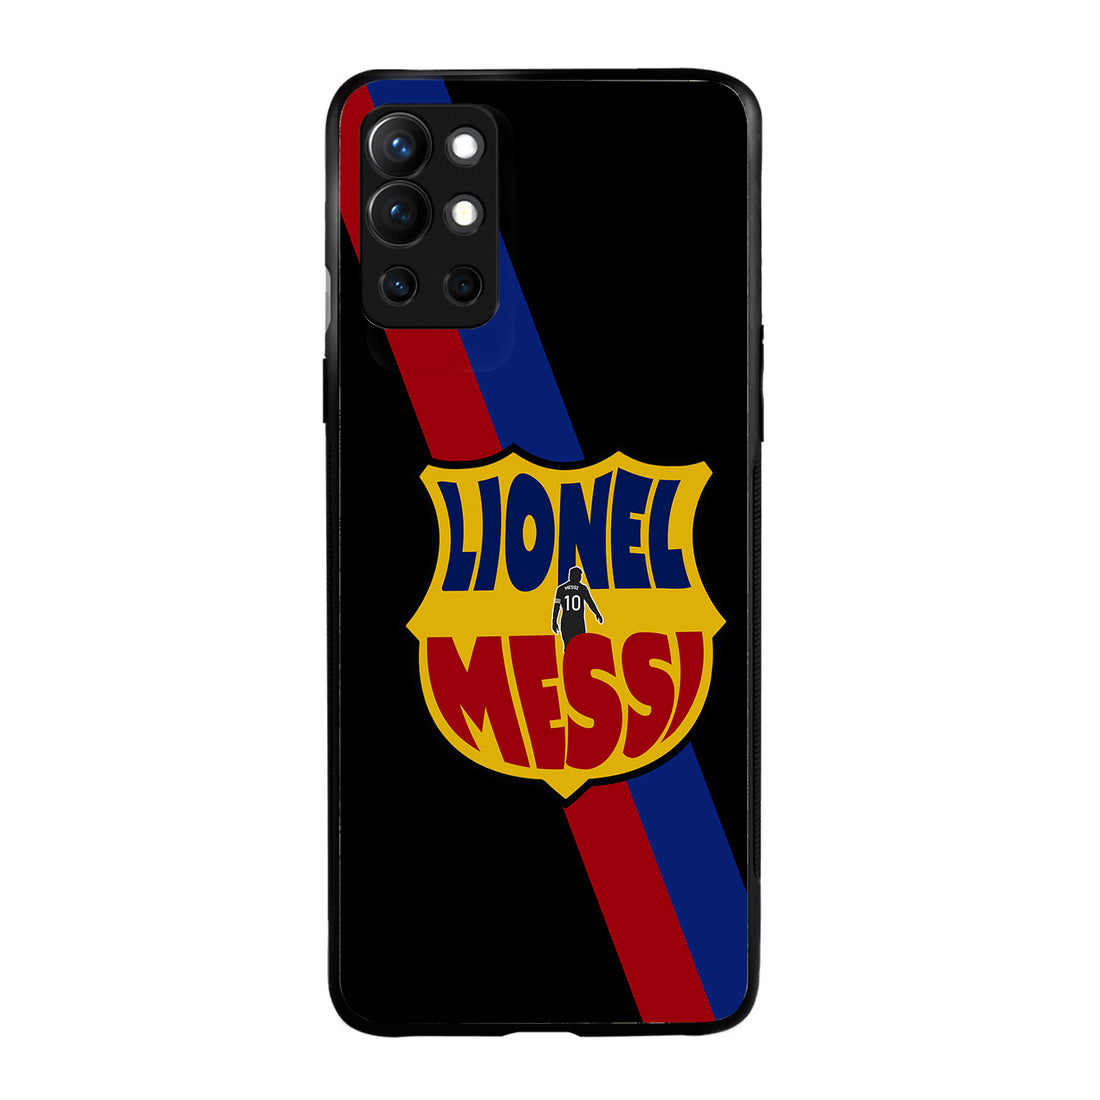 Lionel Messi Sports Oneplus 9 R Back Case